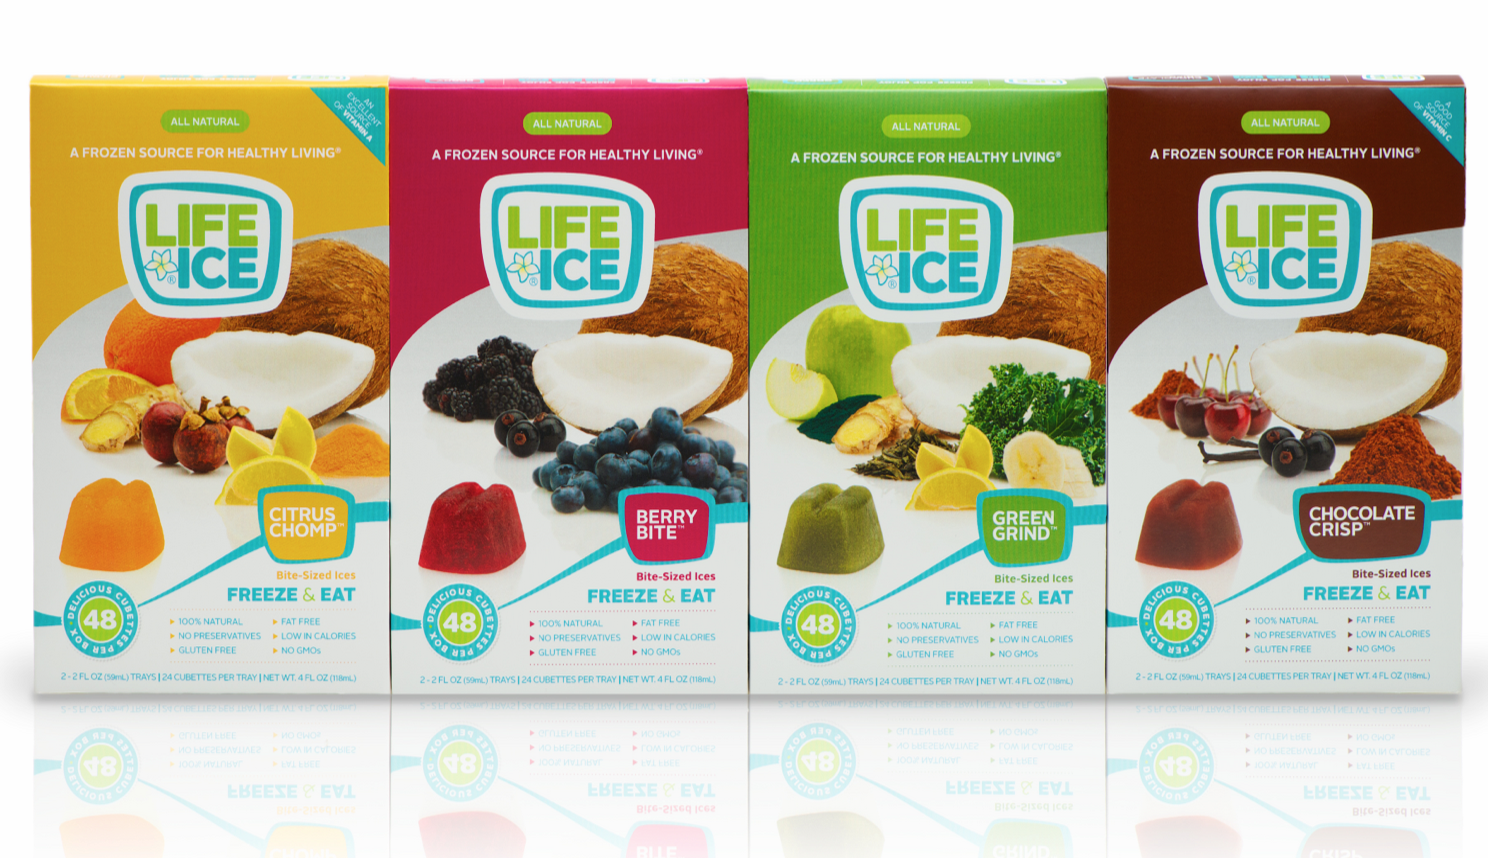 LifeIce, The New Frozen Healthy Snack Alternative